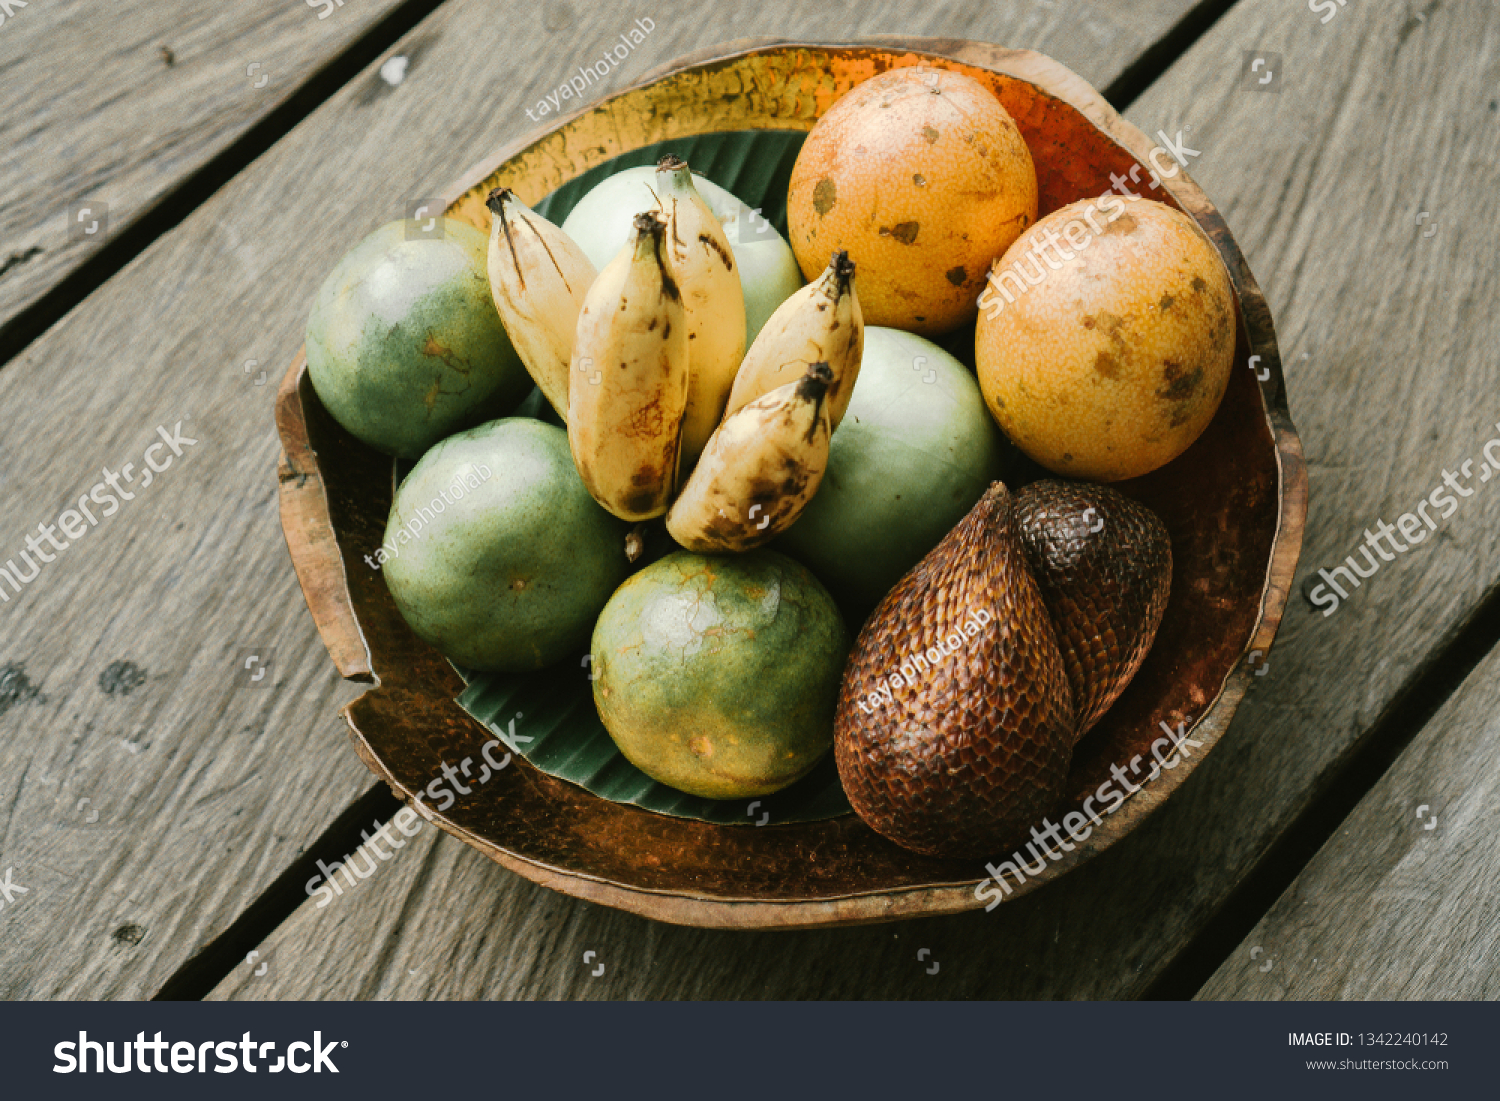 Organic tropical fruits in a platter: snake fruit, passion fruit, bananas. Assorted exotic fruit plate located on a wooden rustic background. Top view. Vegan detox healthy concept. Selective focus.  #1342240142